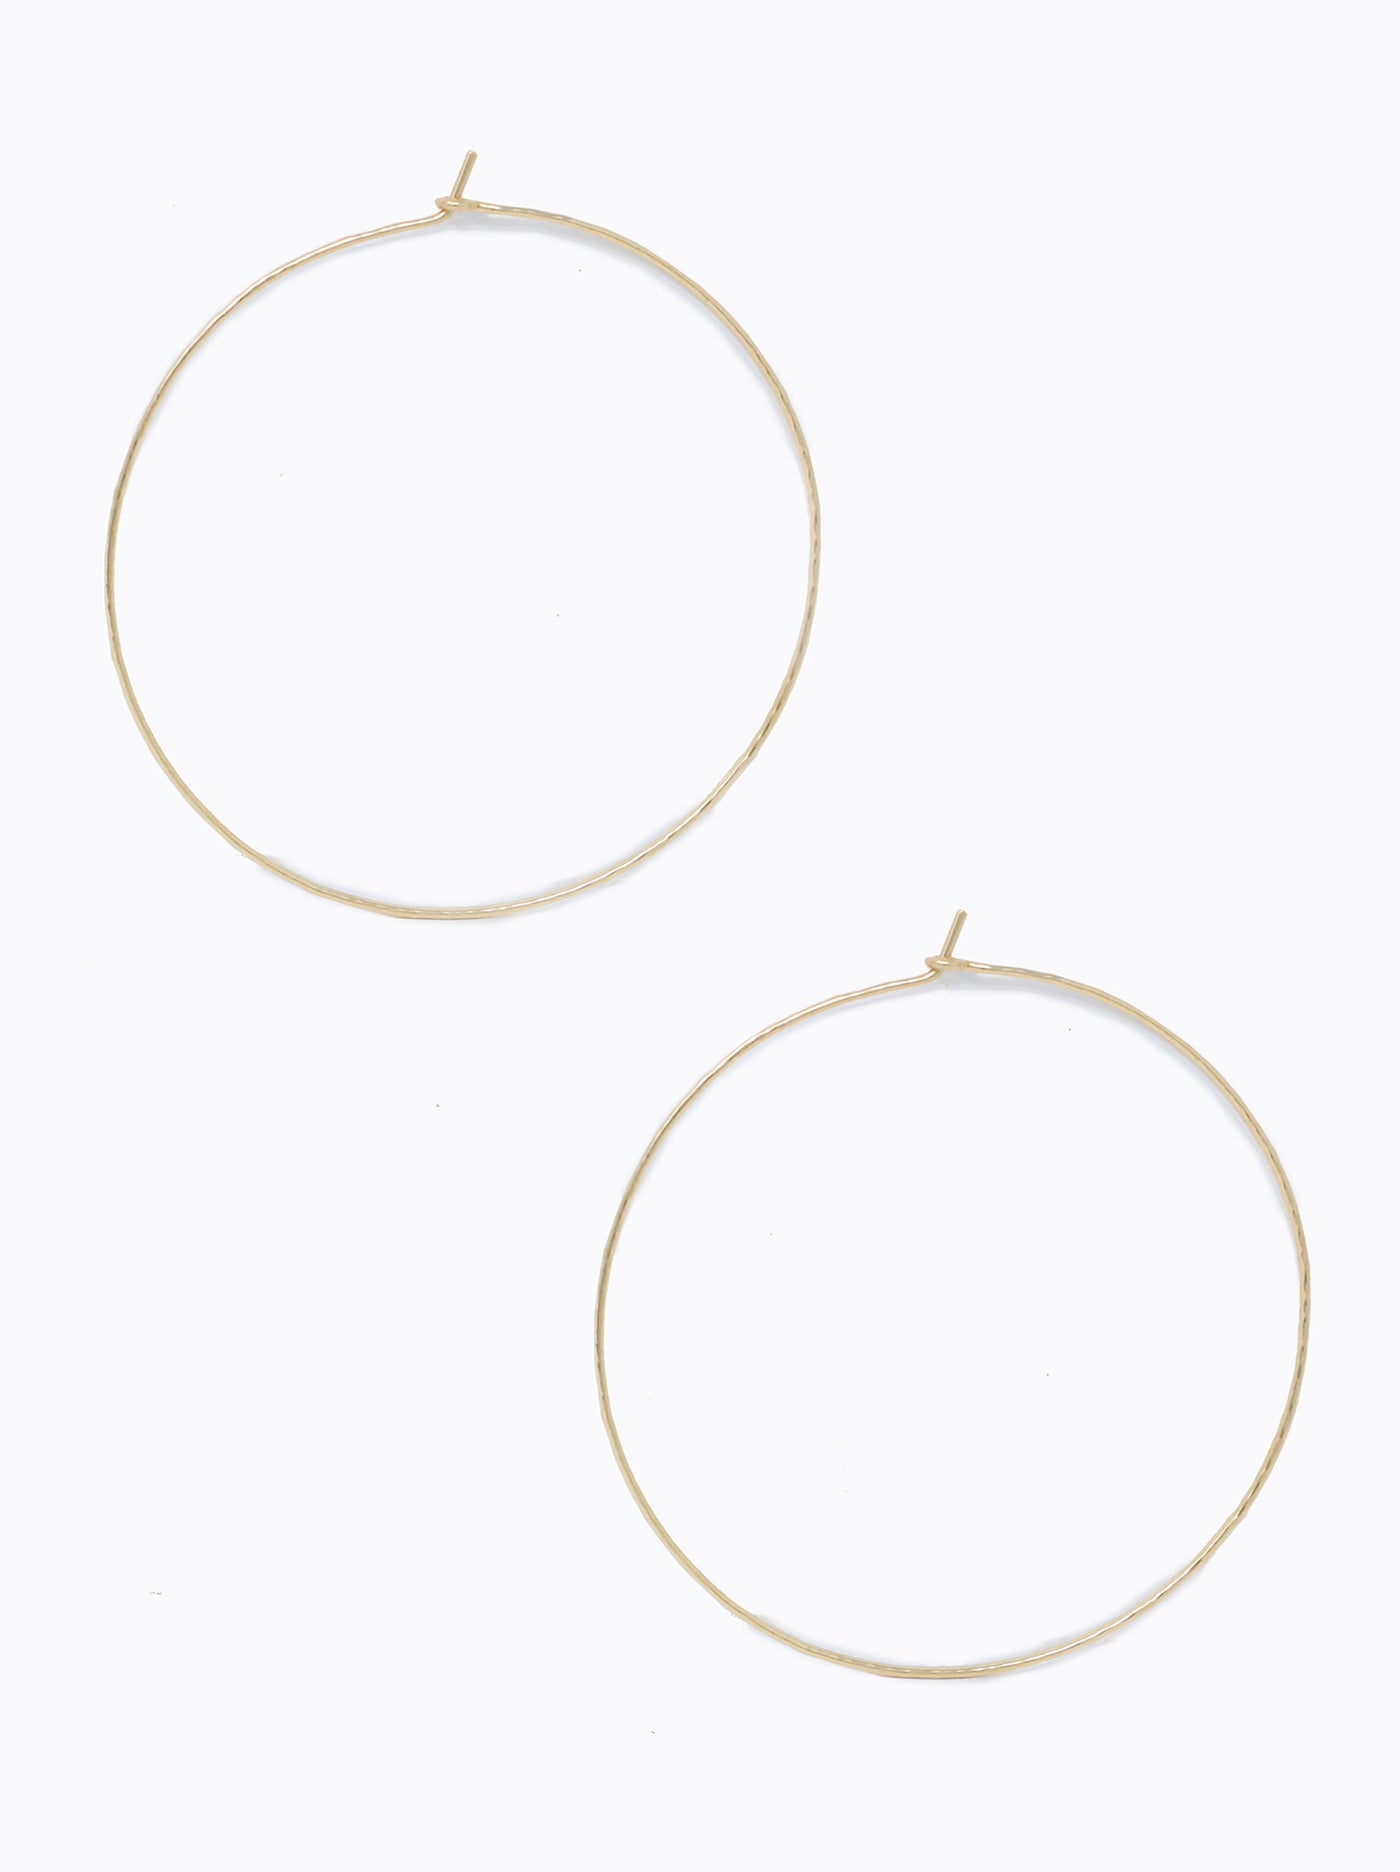 Able Luxe Hoops- 2.5"